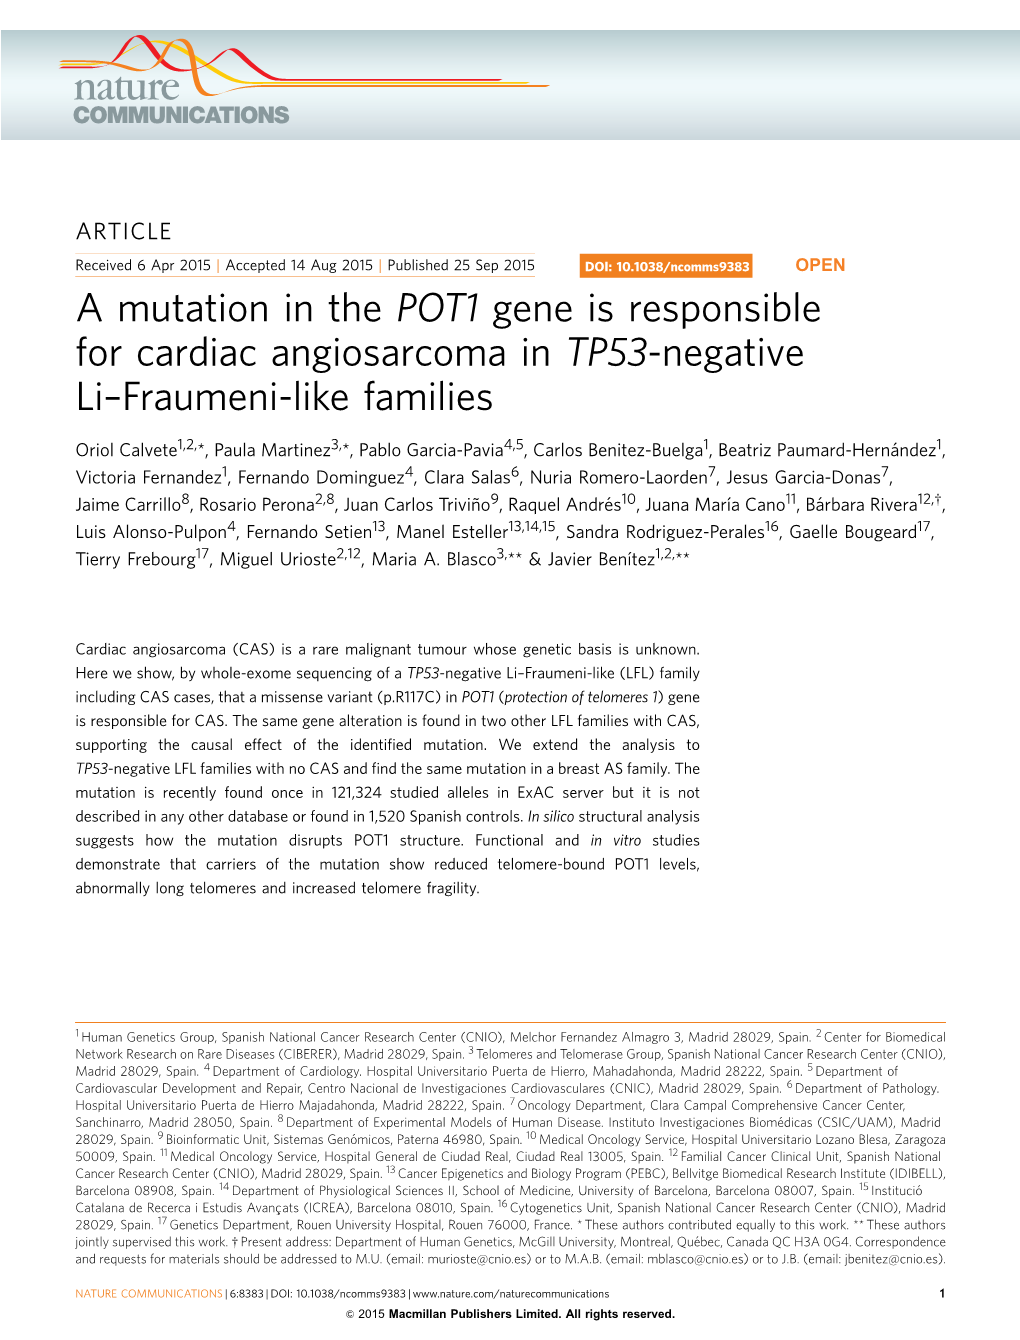 A Mutation in the POT1 Gene Is Responsible for Cardiac Angiosarcoma in TP53-Negative Li–Fraumeni-Like Families